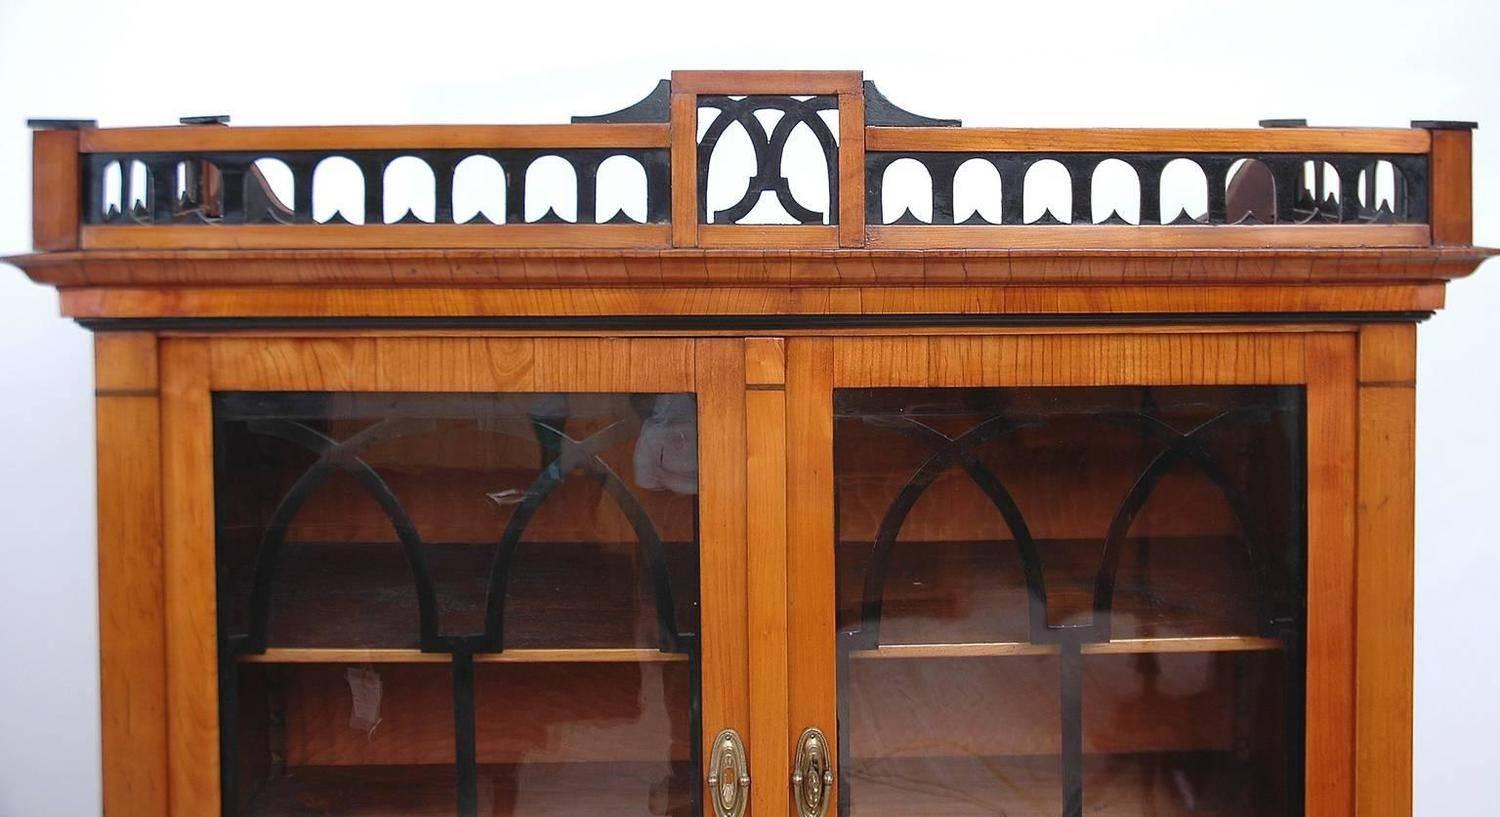 An Austrian Biedermeier cupboard in cherrywood with carved, open fretwork gallery, with ebonized details above crown molding. Arched Gothic style tracery work on interior of glass doors is ebonized as are various moldings throughout. Offers display